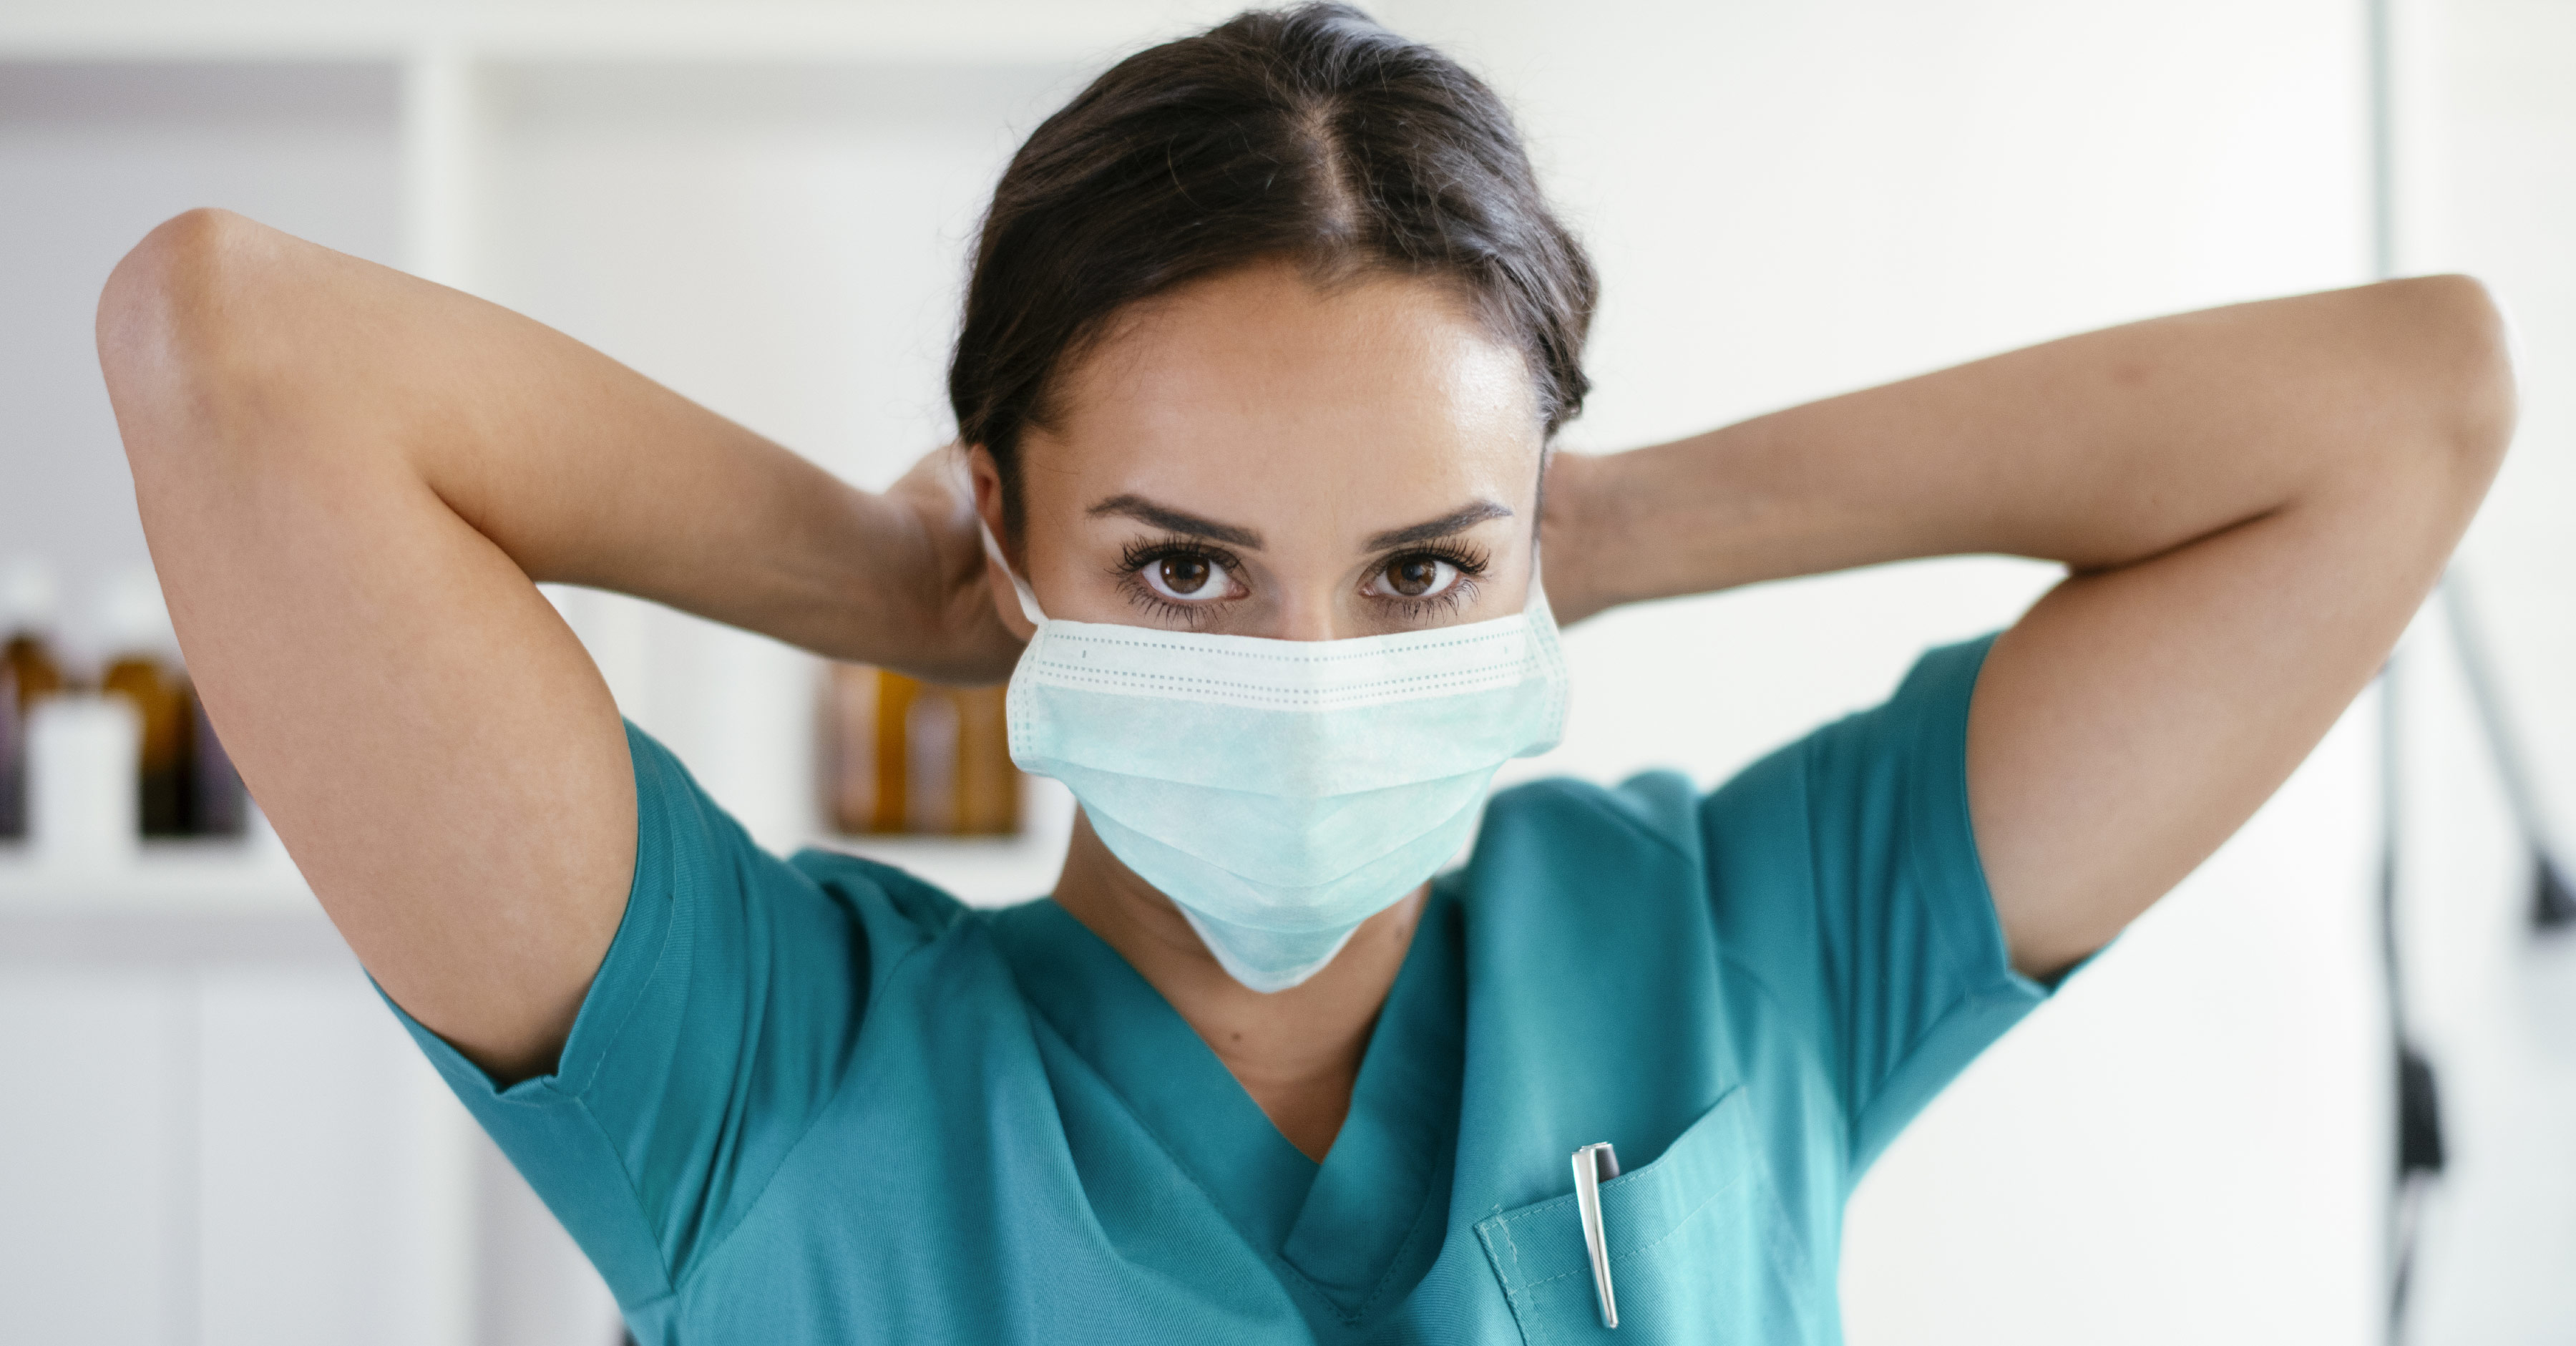 3 soft skills that helped me become a better nurse leader during the COVID-19 pandemic